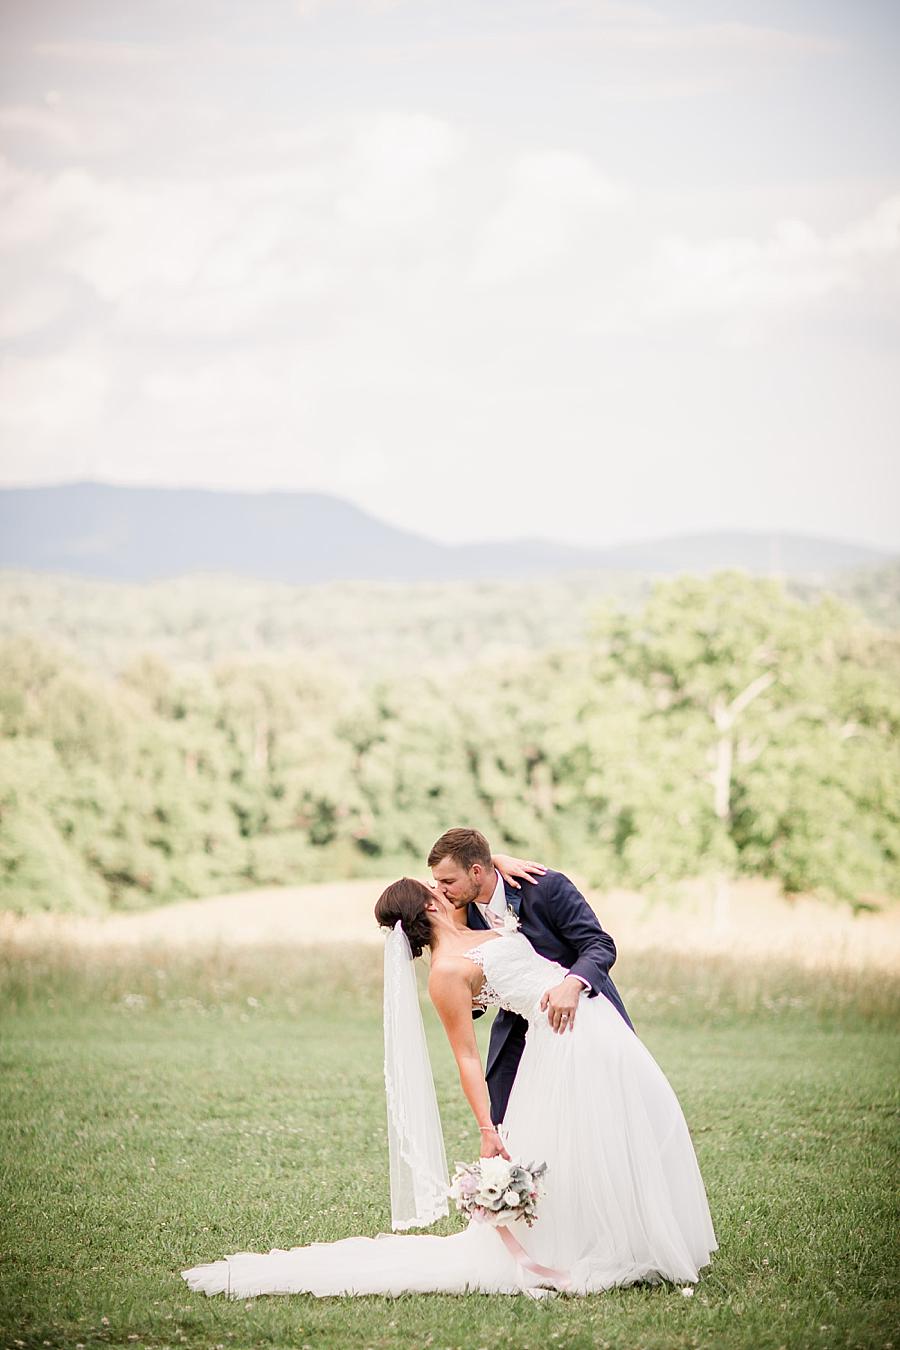 Dip kiss at this Estate of Grace Wedding by Knoxville Wedding Photographer, Amanda May Photos.